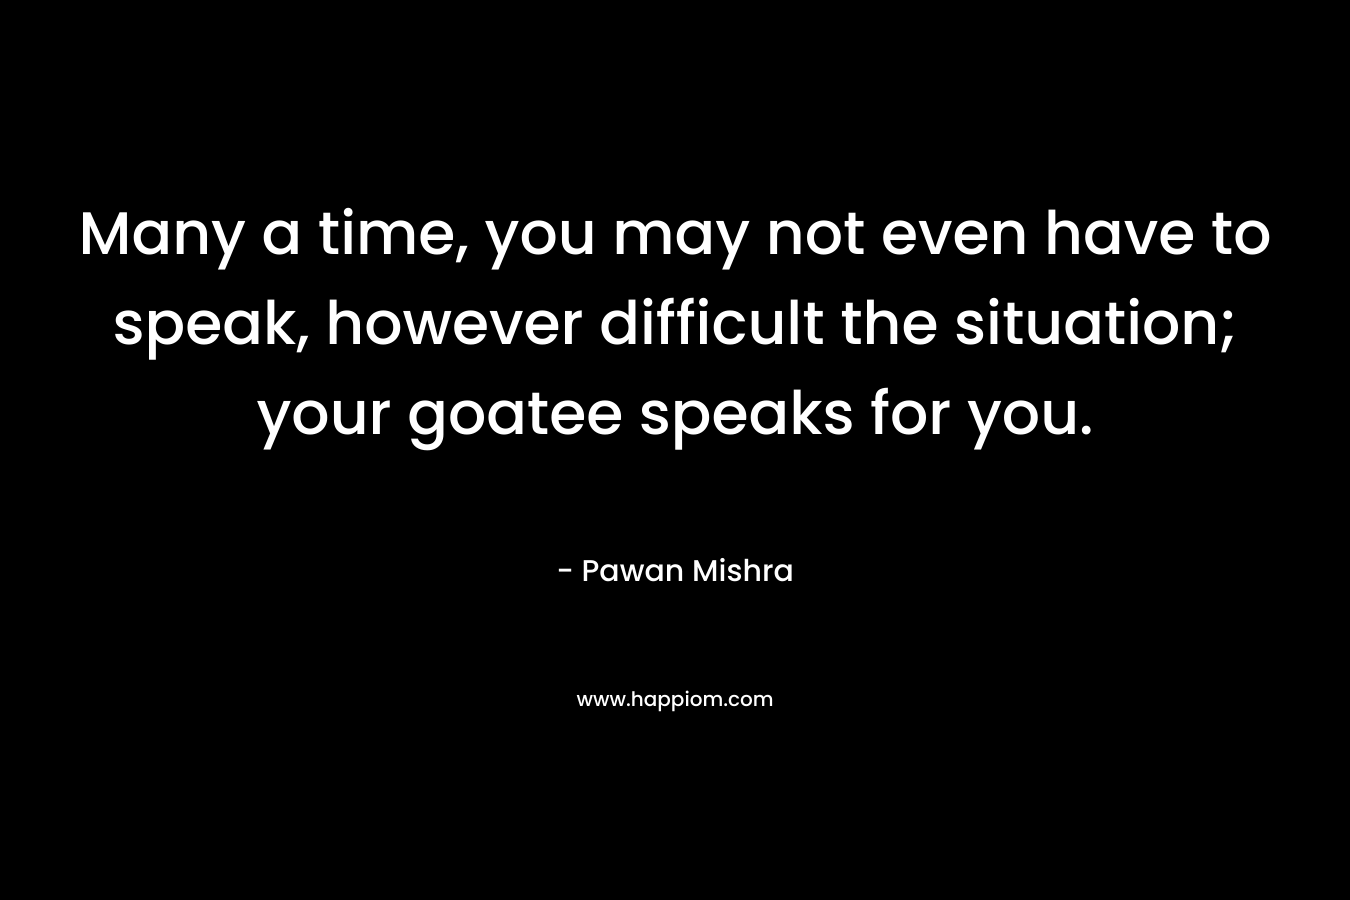 Many a time, you may not even have to speak, however difficult the situation; your goatee speaks for you. – Pawan Mishra